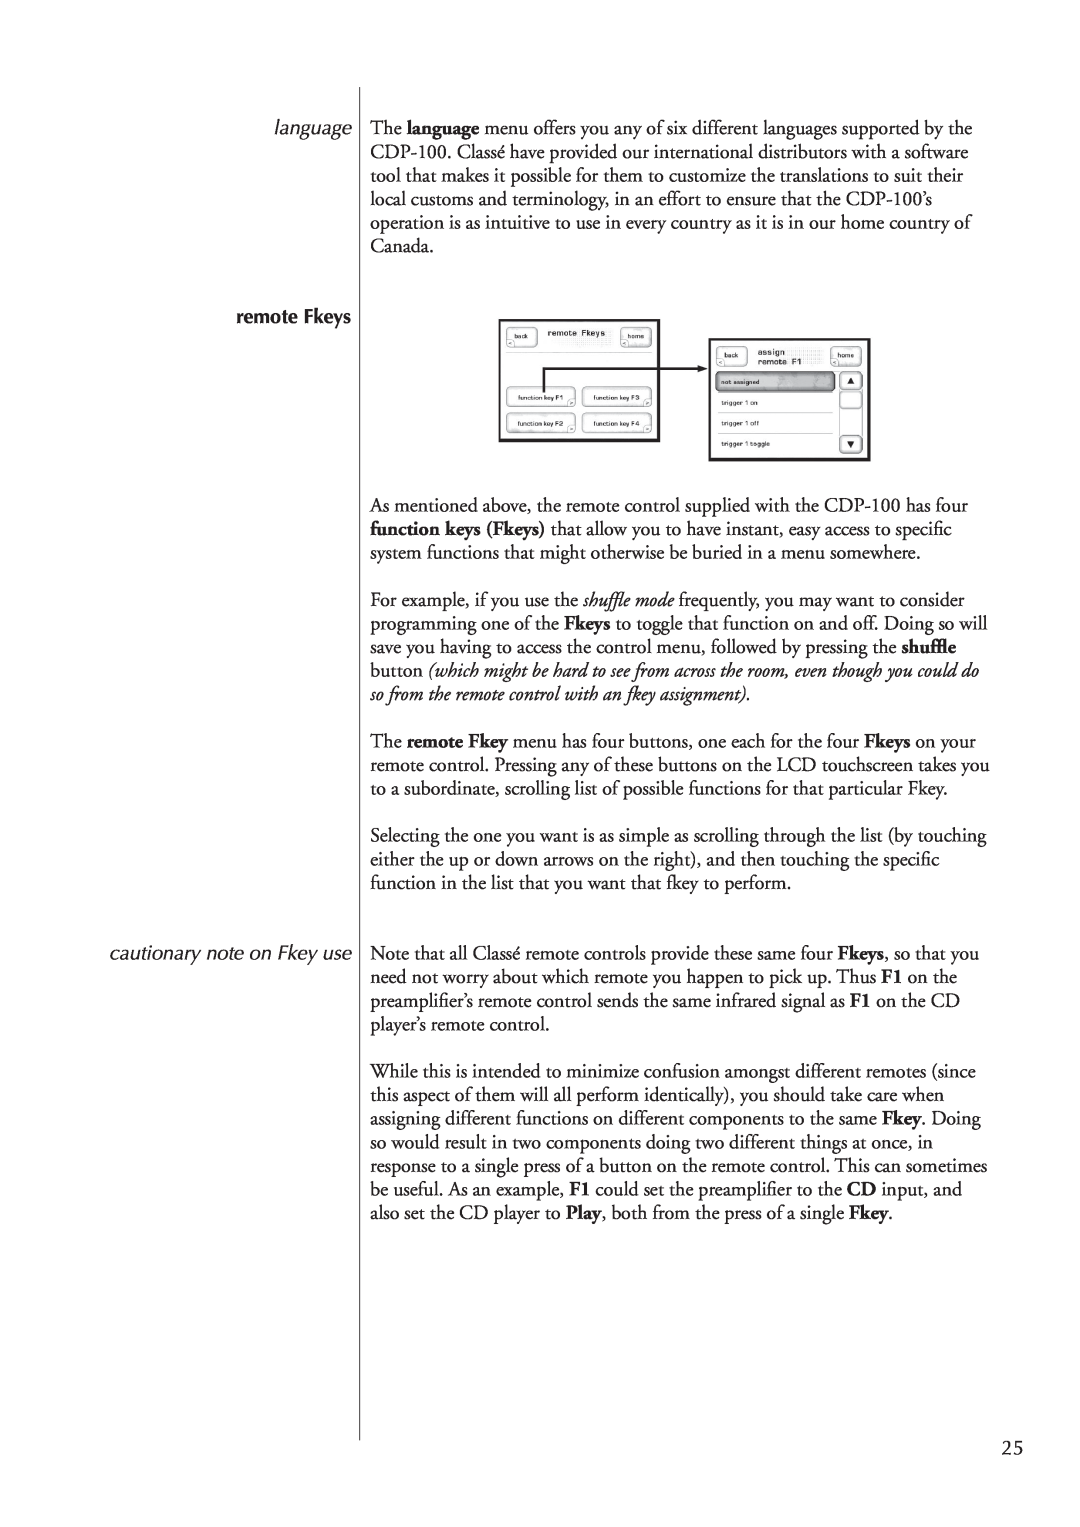 Classe Audio CDP-100 owner manual language, remote Fkeys, cautionary note on Fkey use 